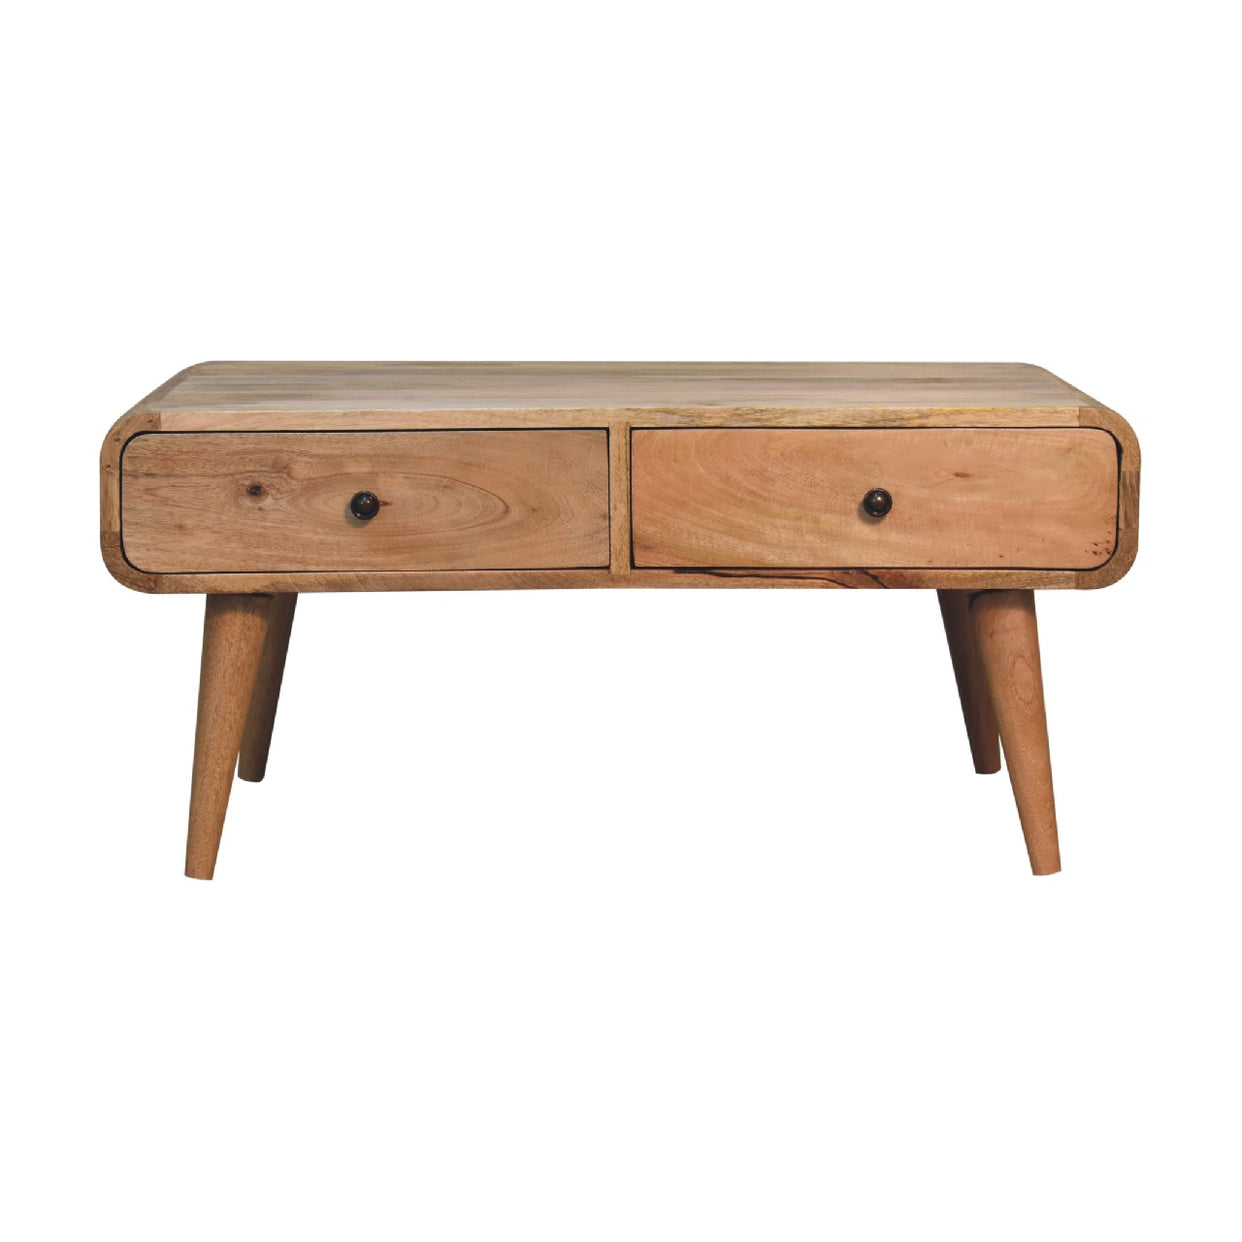 2 Drawer Curved Oak-Ish Mango Wood Coffee Table from Artisan Furniture - IN3570